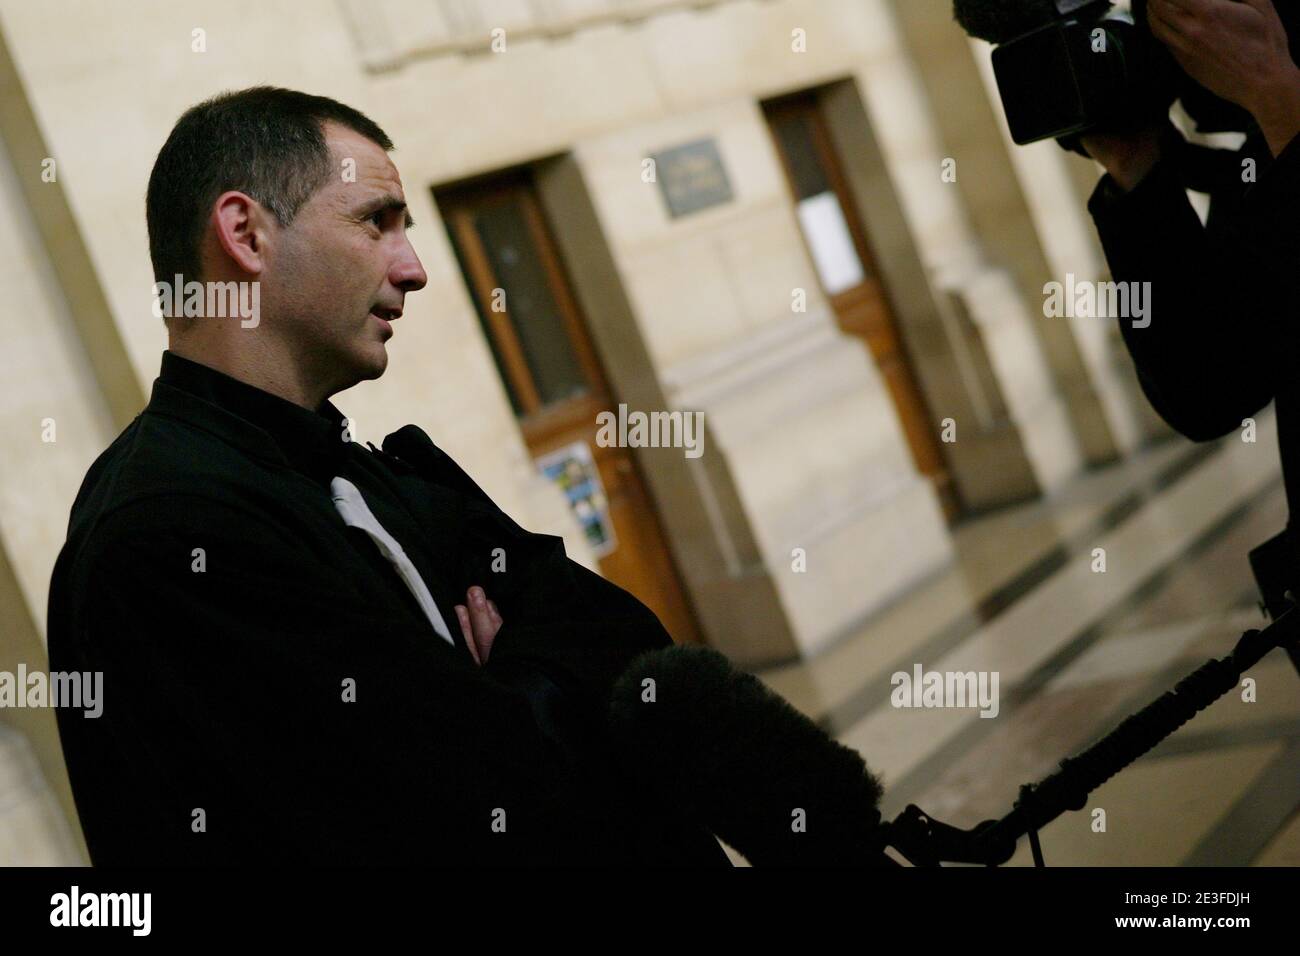 Yvan Colonna's laywer Gilles Simeoni at the Paris courthouse to attend the Yvan Colonna Trial, in Paris, France, on March 5, 2009. Photo by Mousse/ABACAPRESS.COM Stock Photo